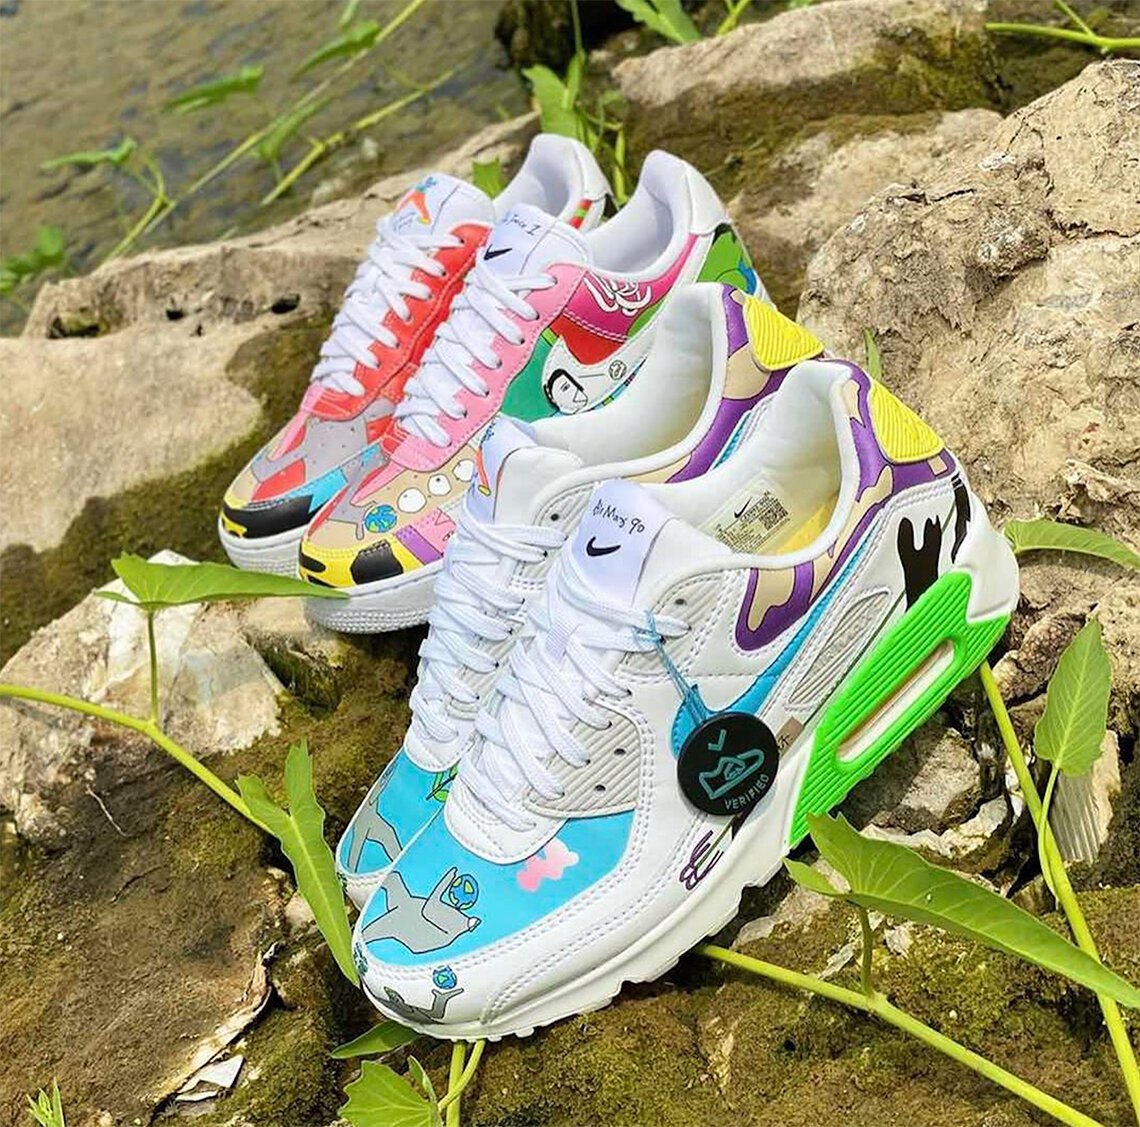 nike flyleather air max 90